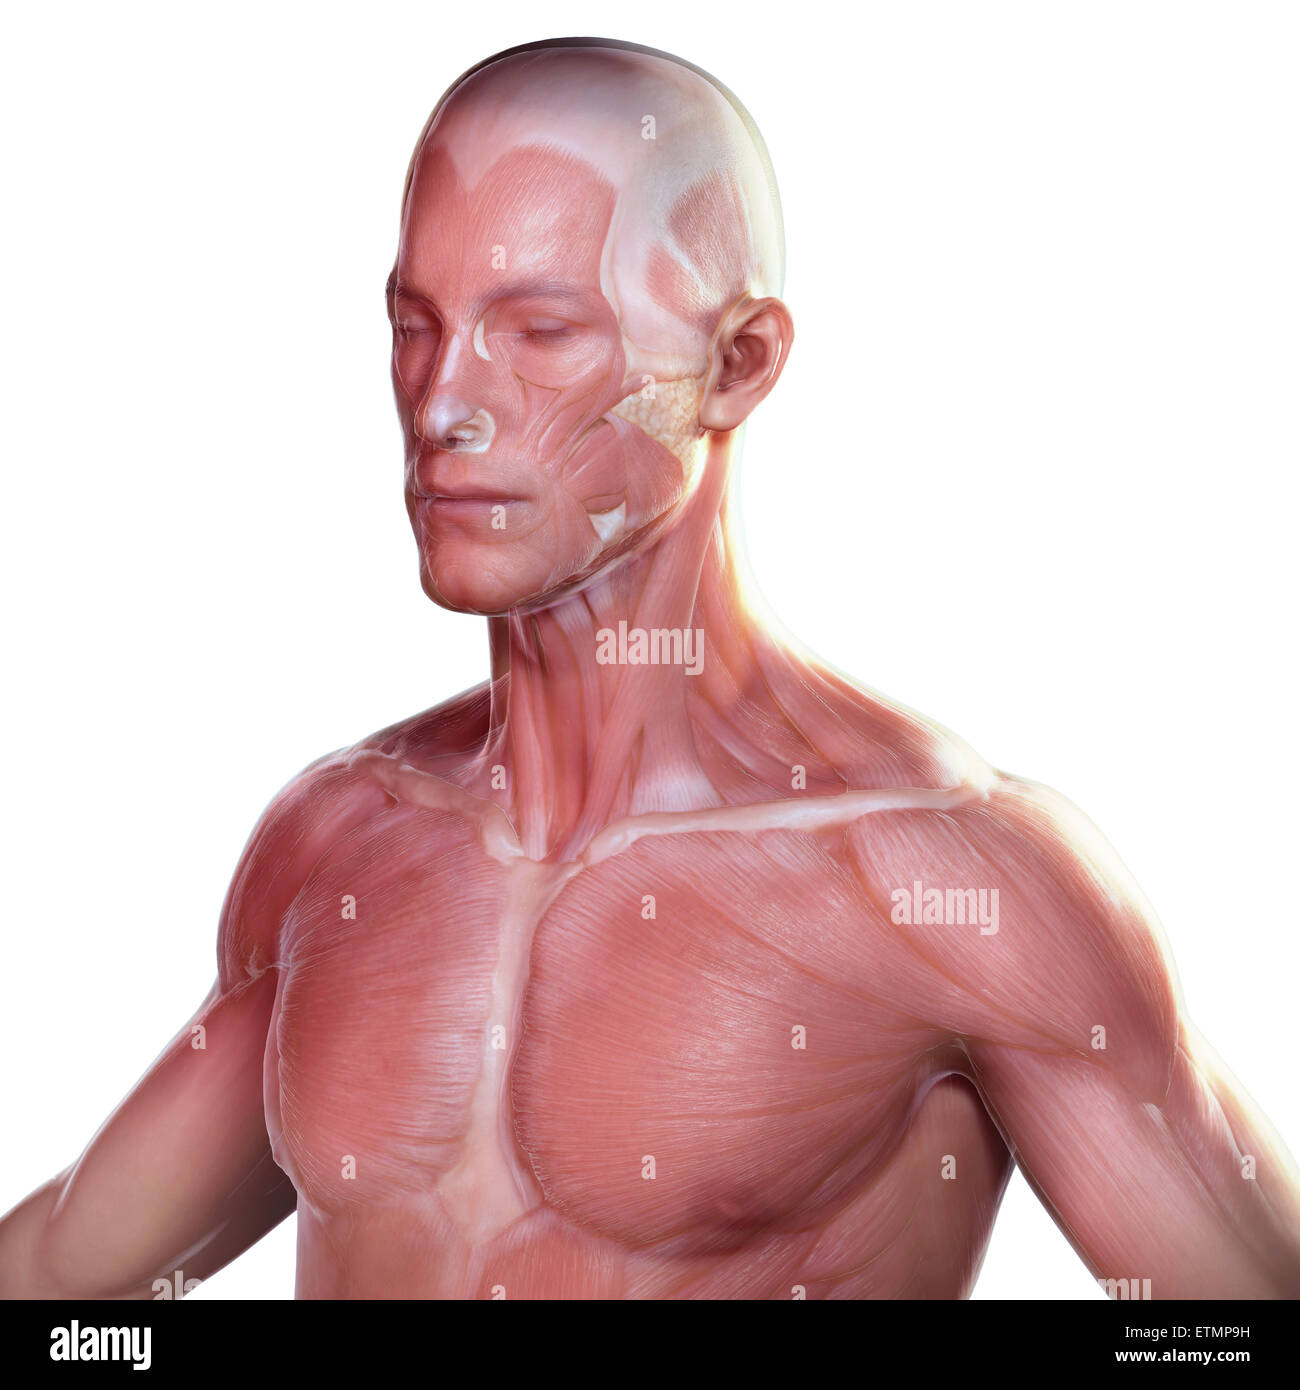 Conceptual image of the face and upper body with the musculature visible under the skin. Stock Photo